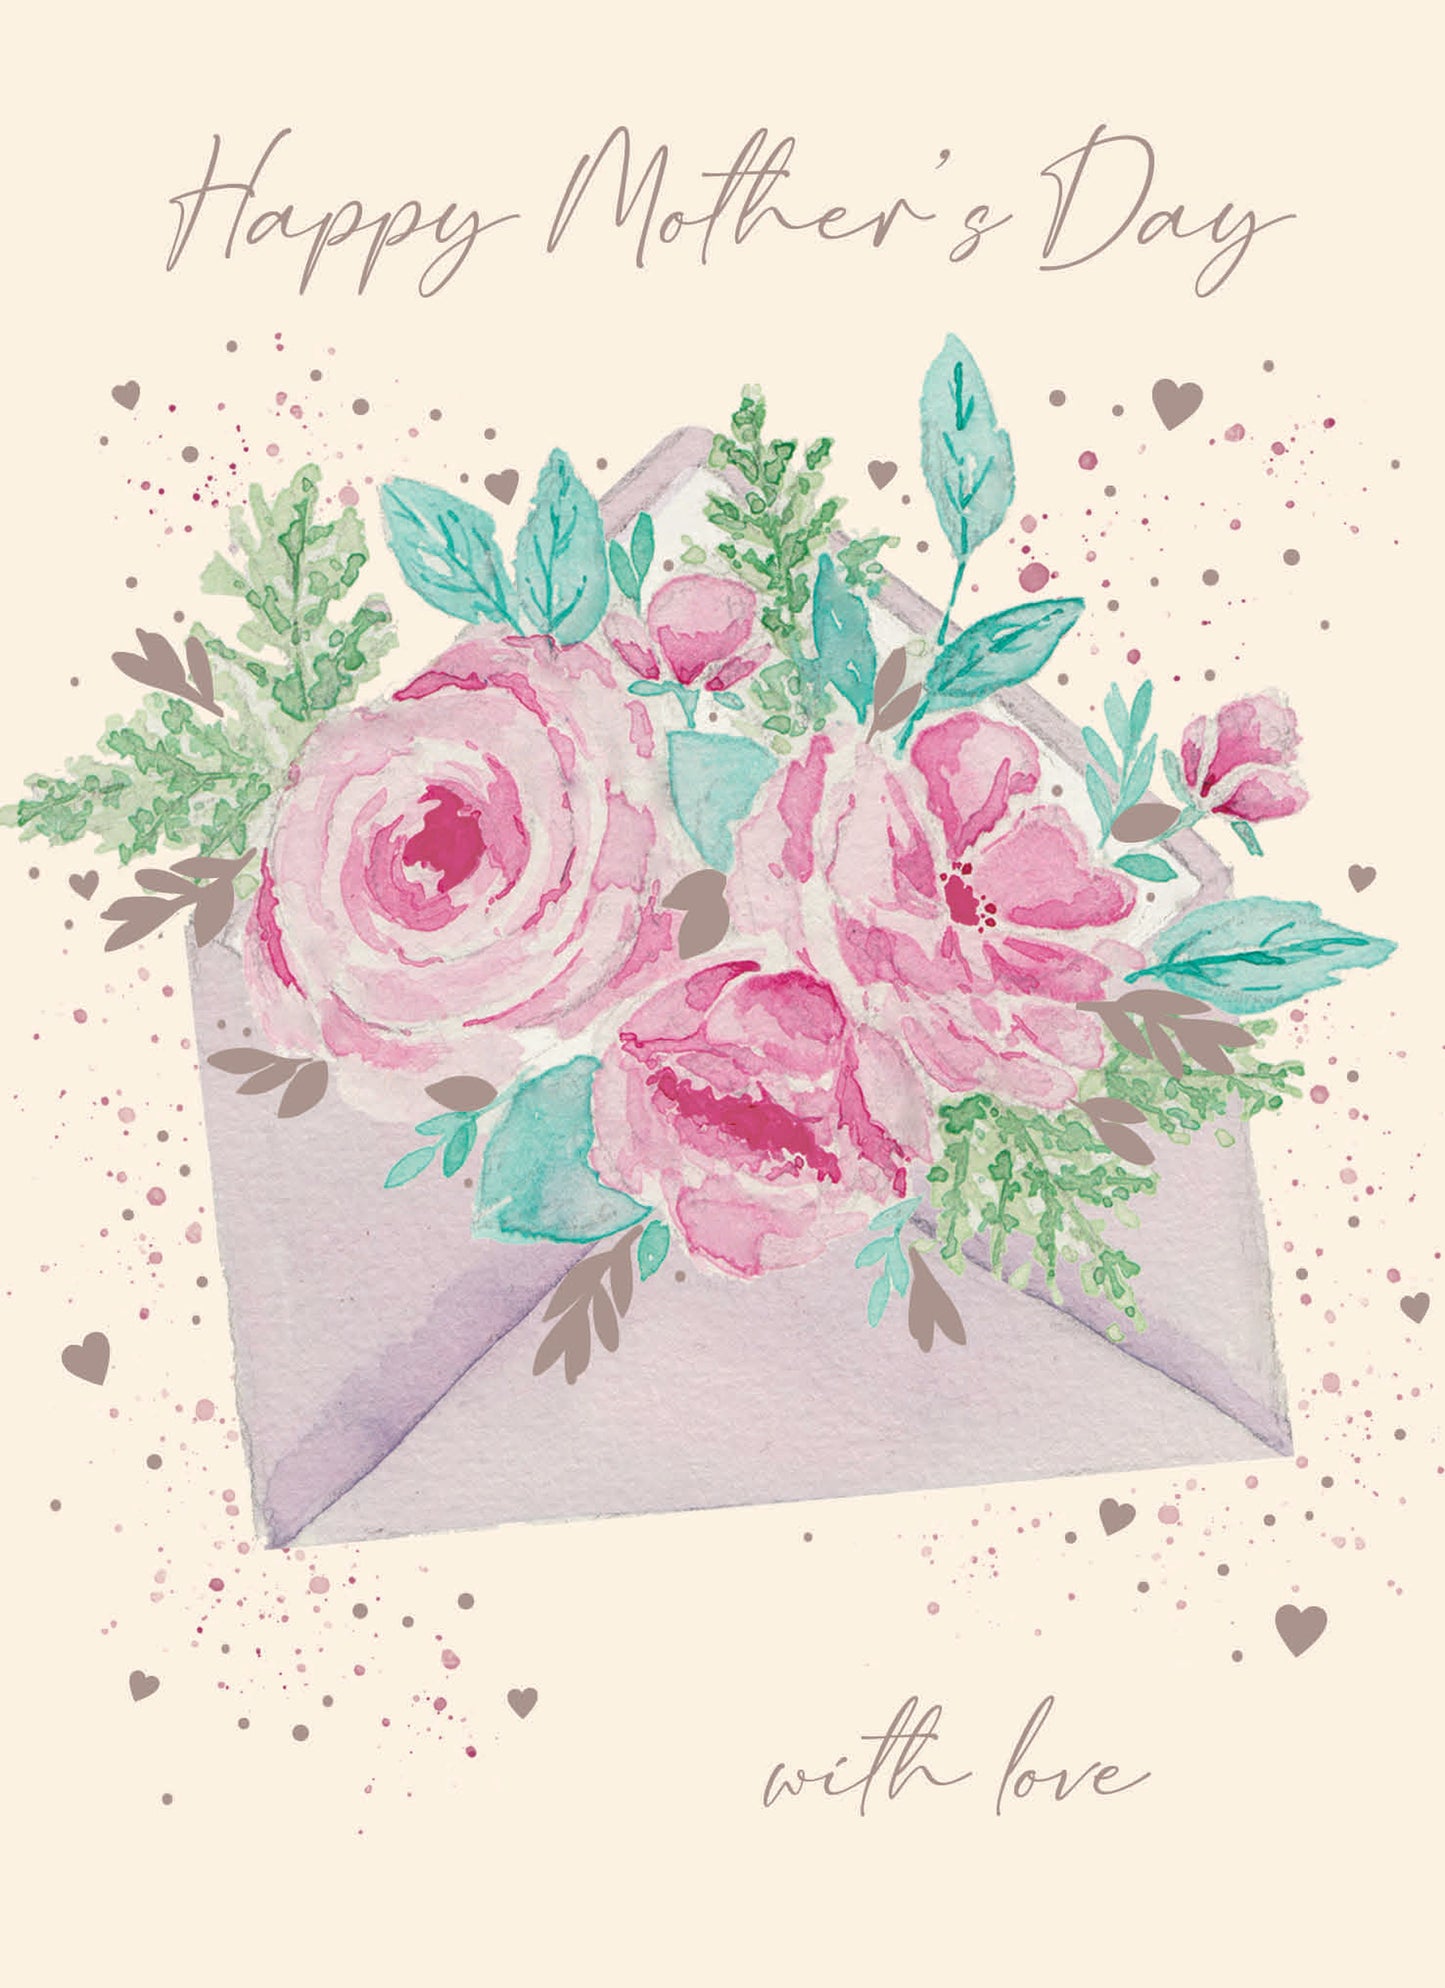 Mother's Day Card - Envelope